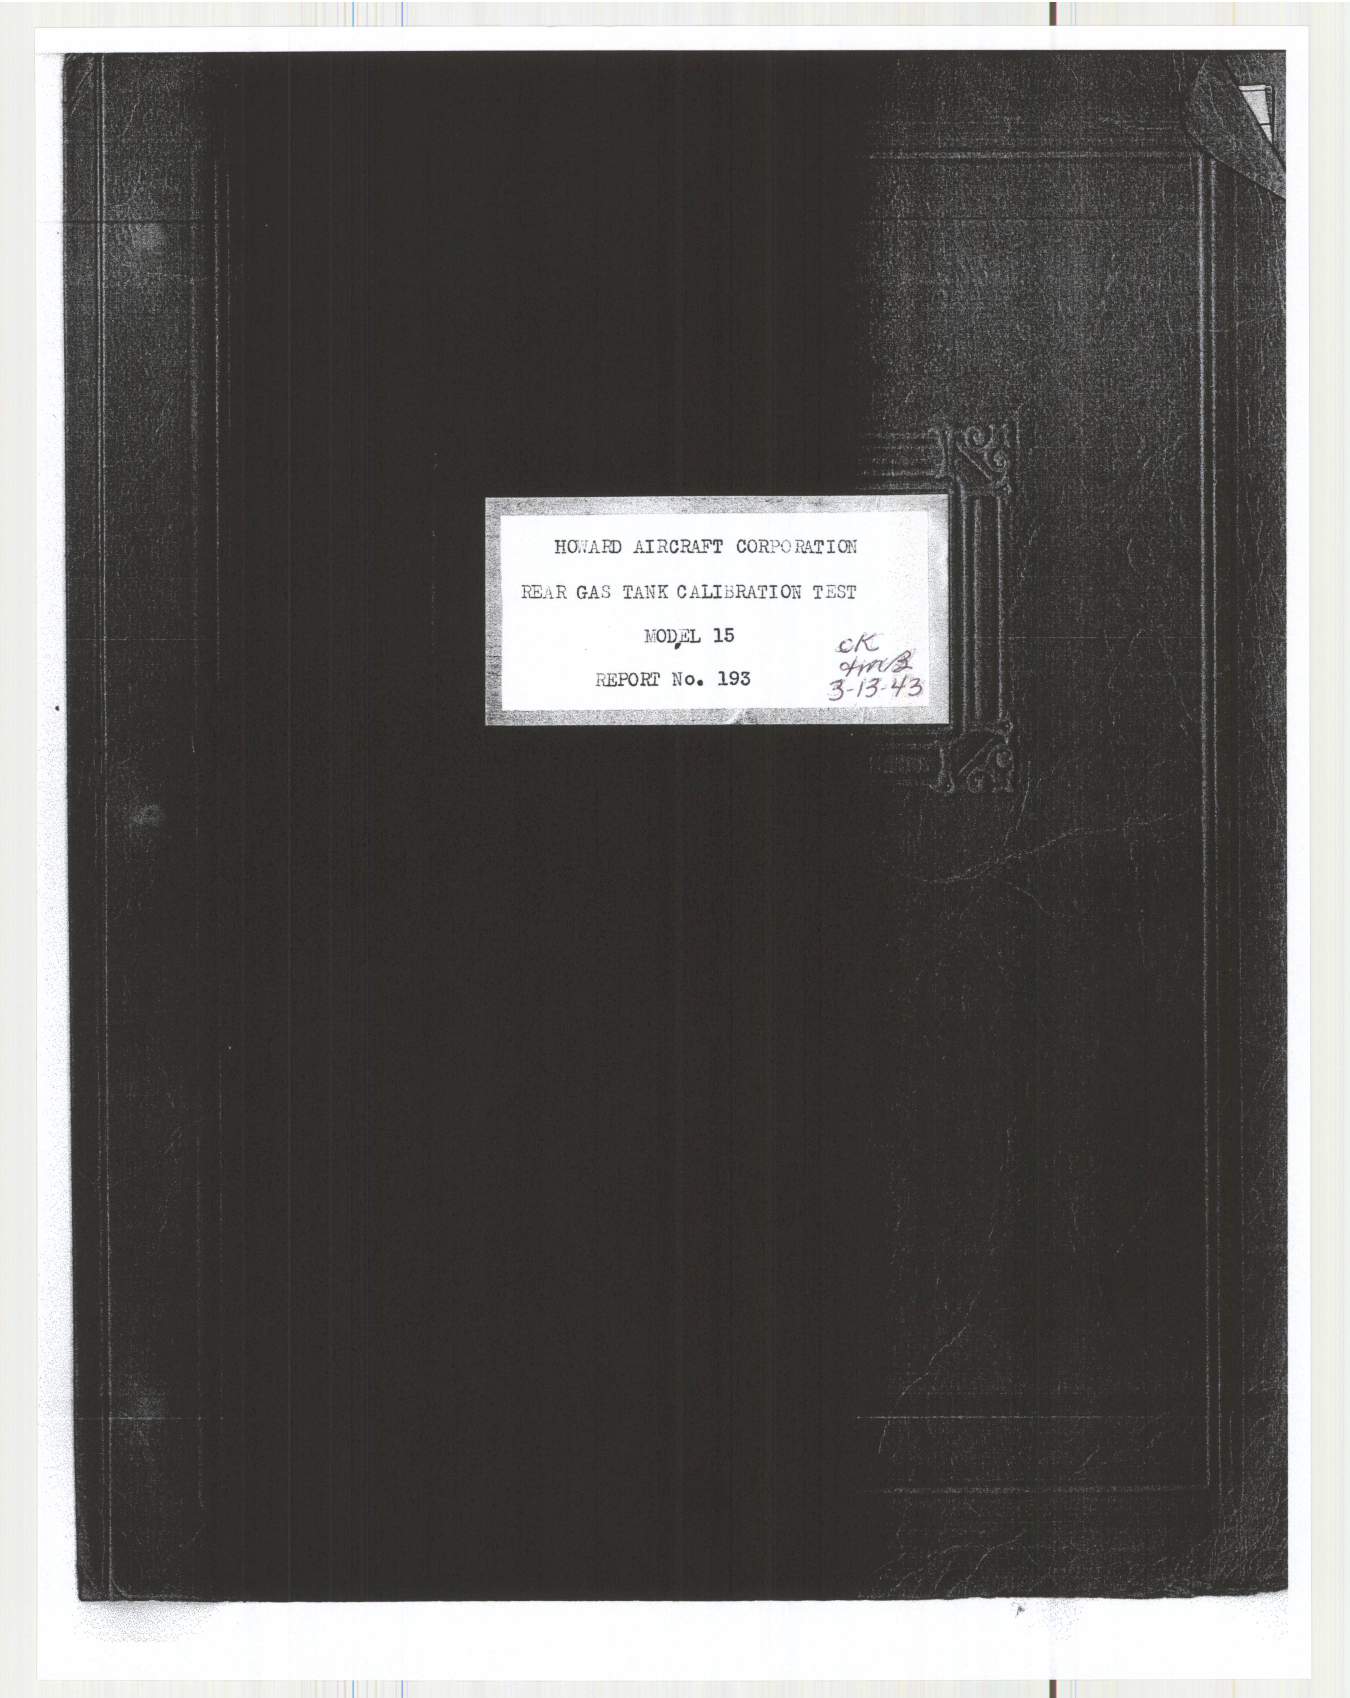 Sample page 1 from AirCorps Library document: Report 193, Rear Gas Tank Calibration Test, DGA-15